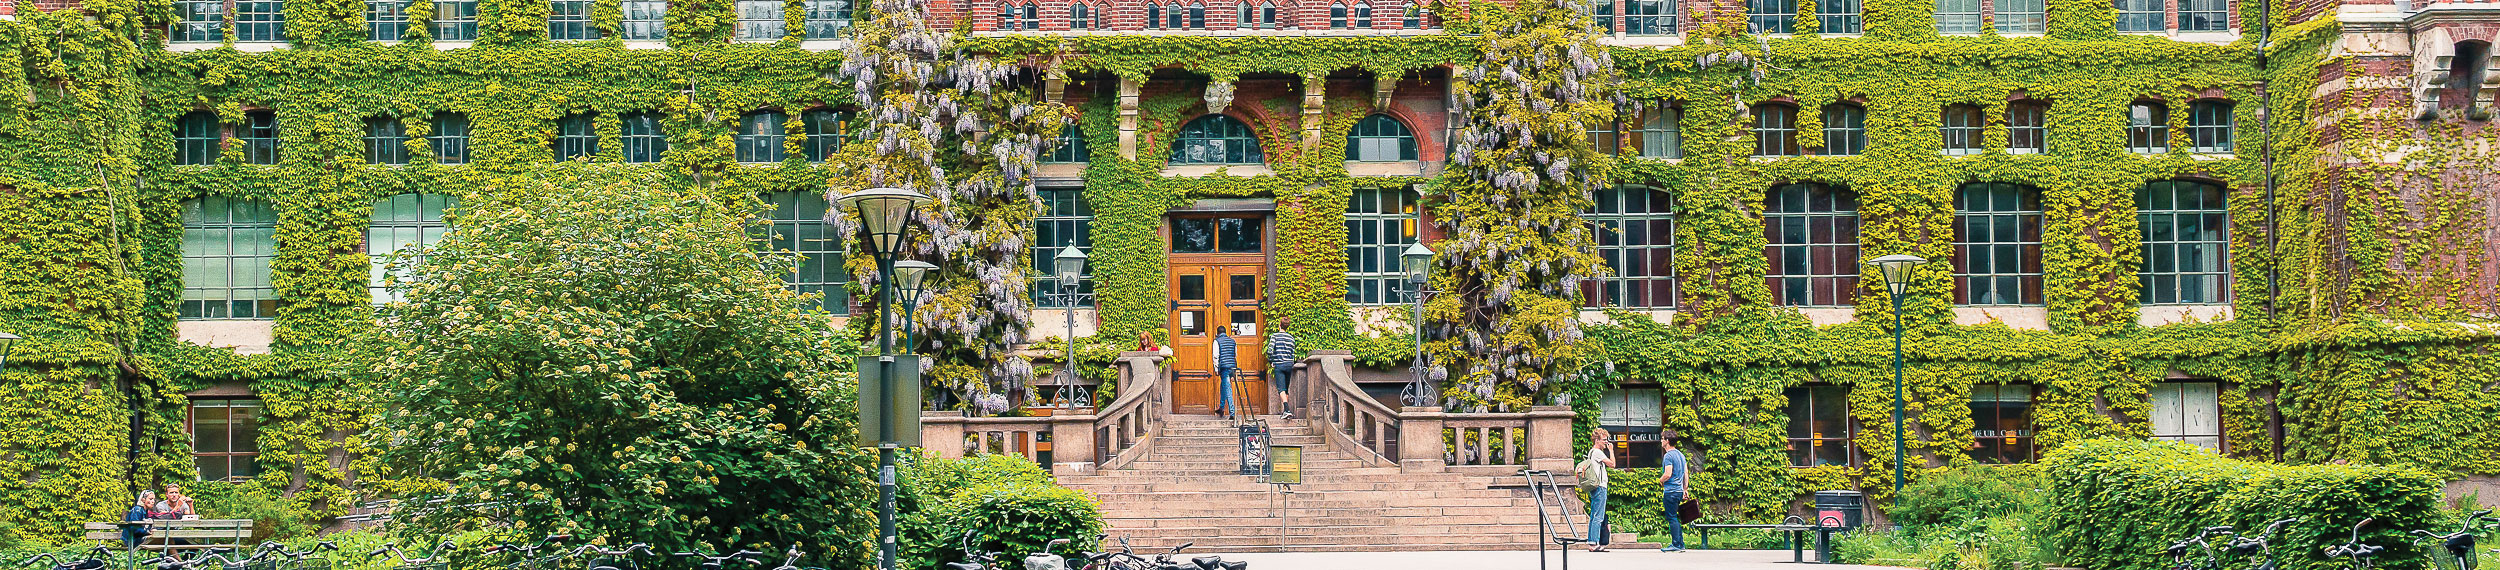 Campus building covered in Ivy in Lund, Sweden. 